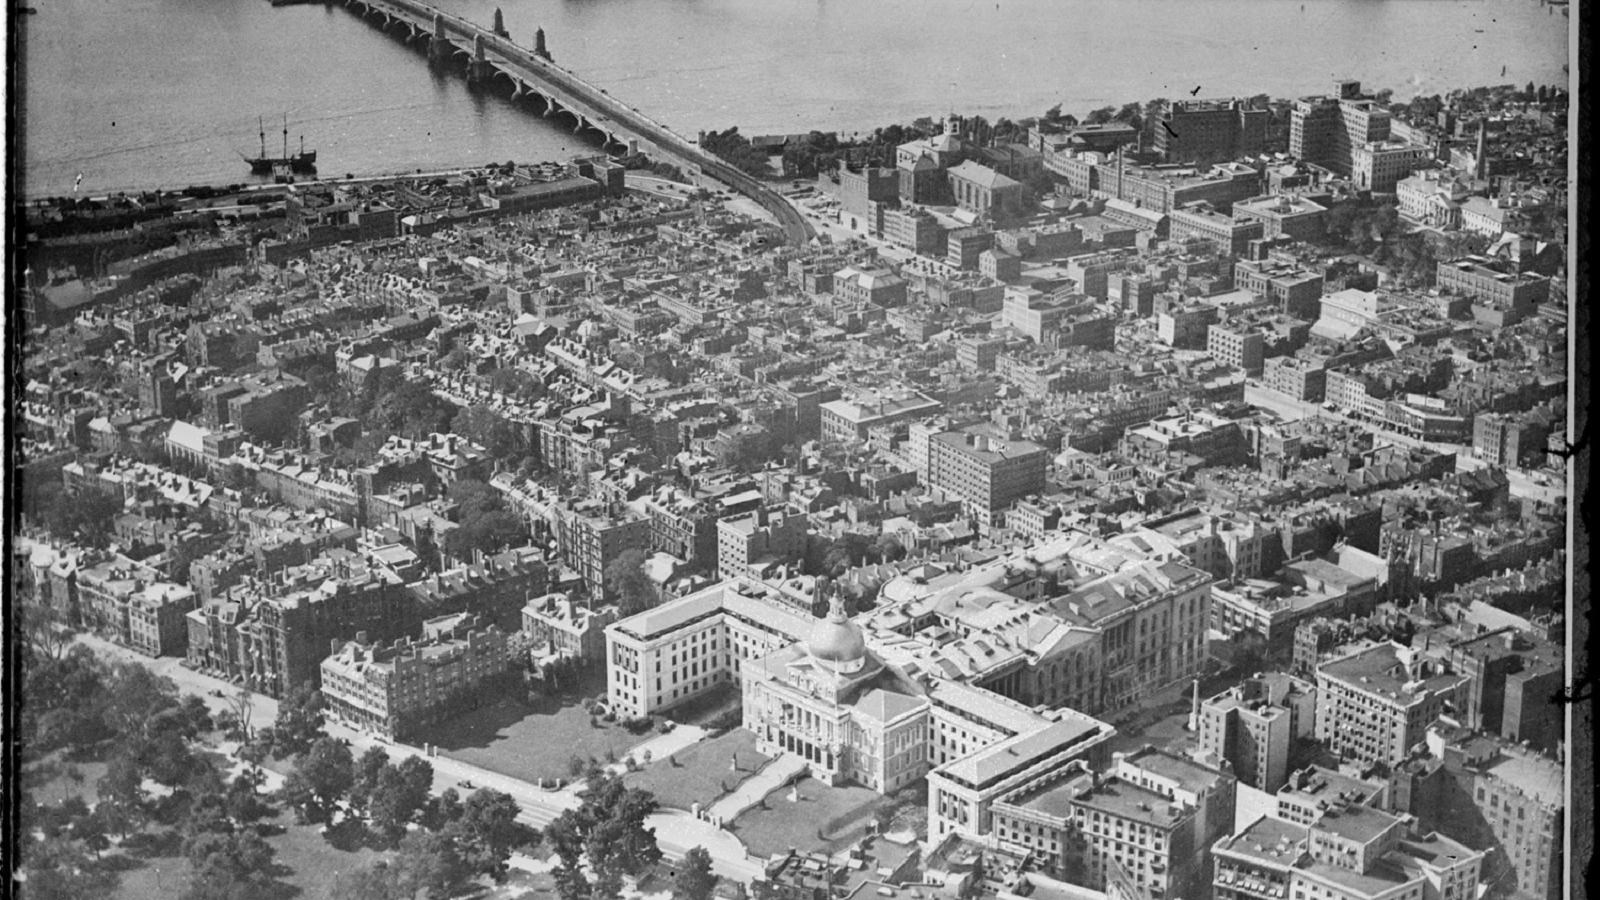 aerial shot of Beacon Hill with Boston Common & State House in the foreground towards Charles River.